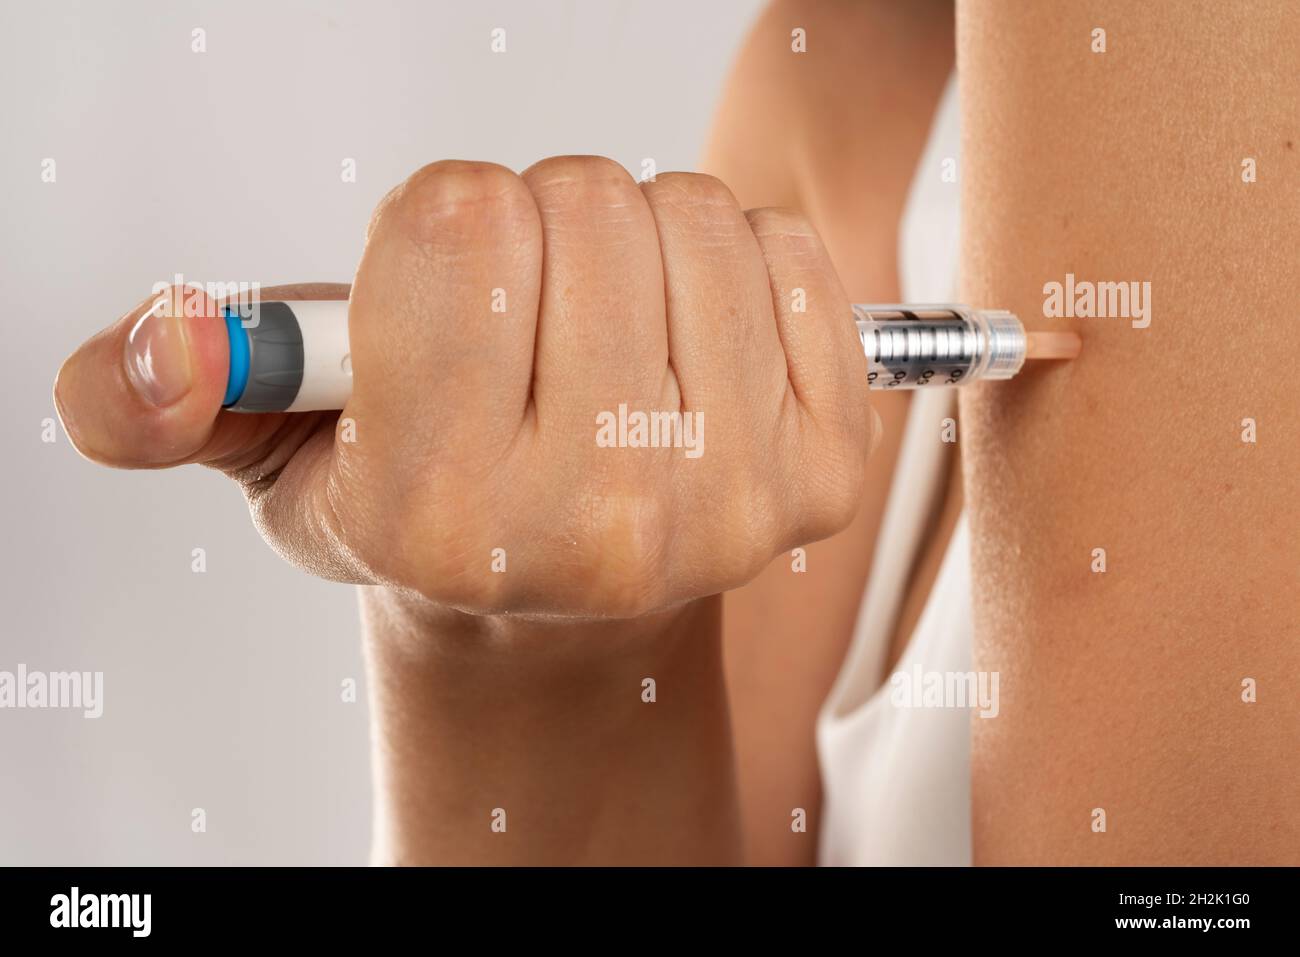 closeup of injecting an insulin injection in hand on a gray background Stock Photo